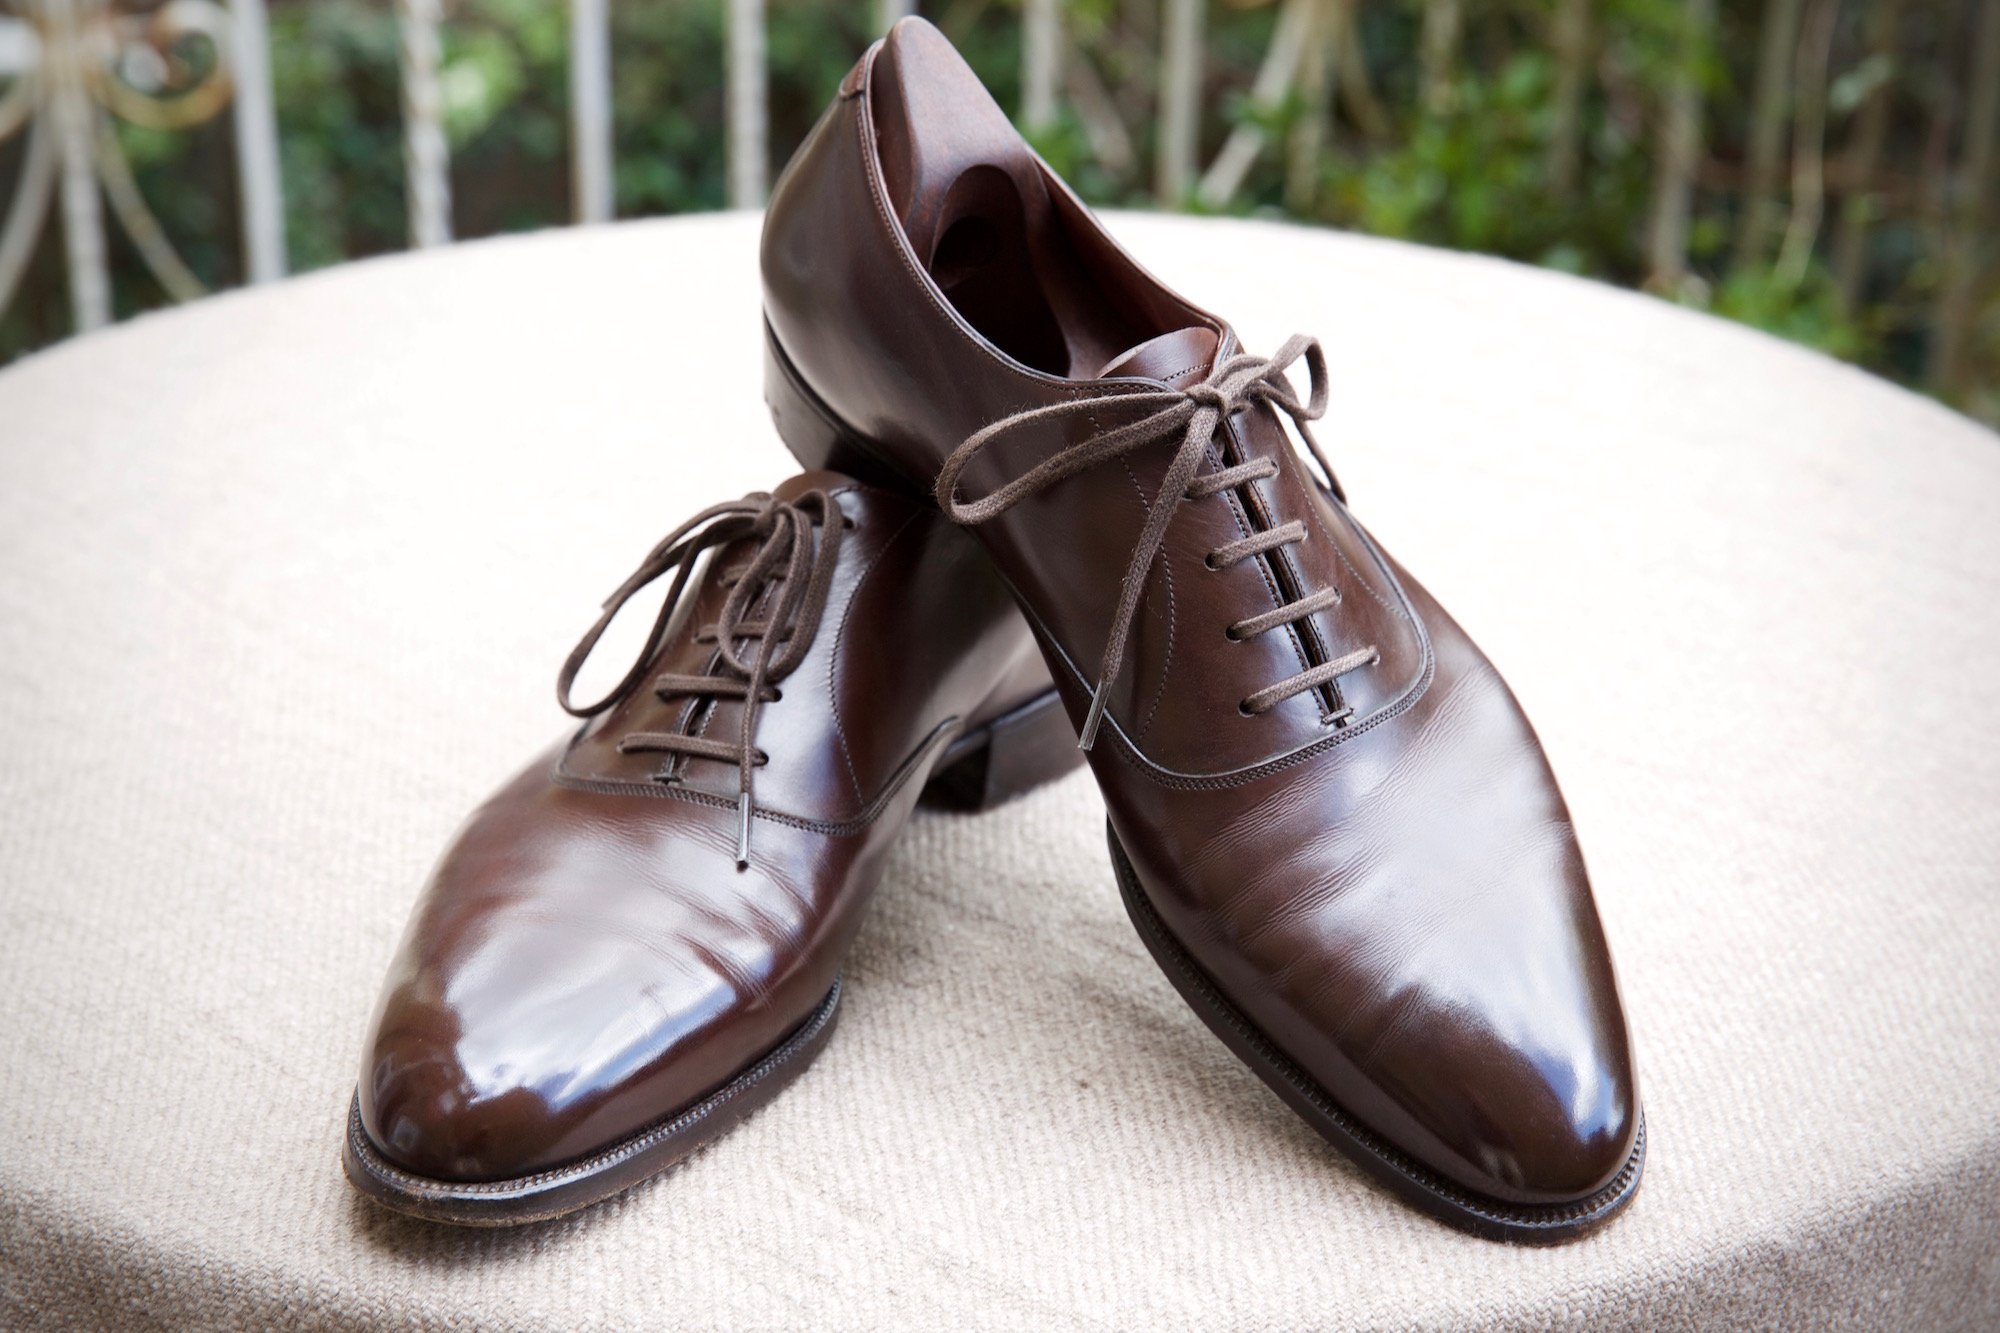 Foster \u0026 Son bespoke shoes: Review 